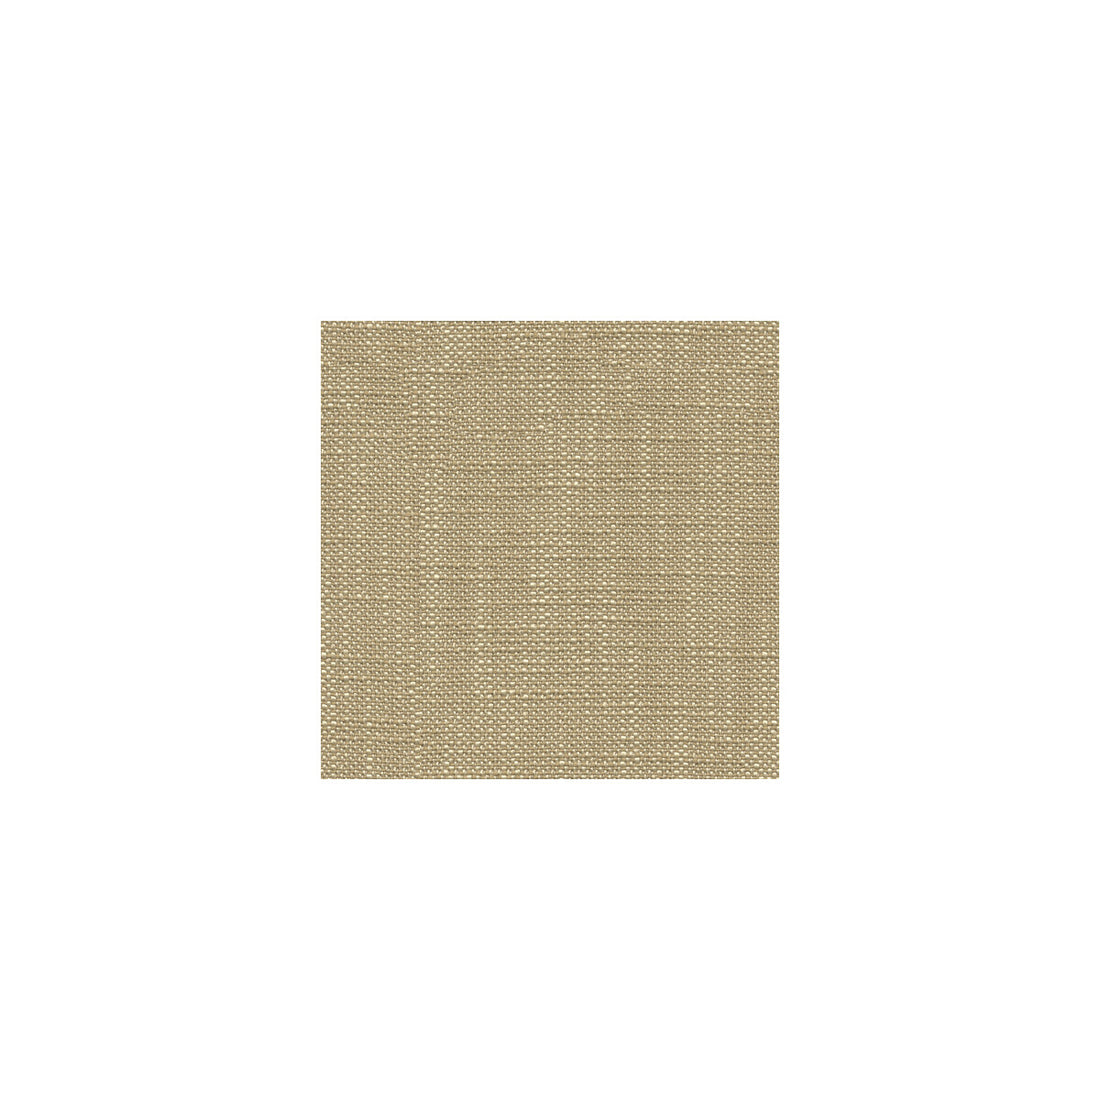 Kf Bas fabric - pattern 31498.16.0 - by Kravet Basics in the Perfect Plains collection